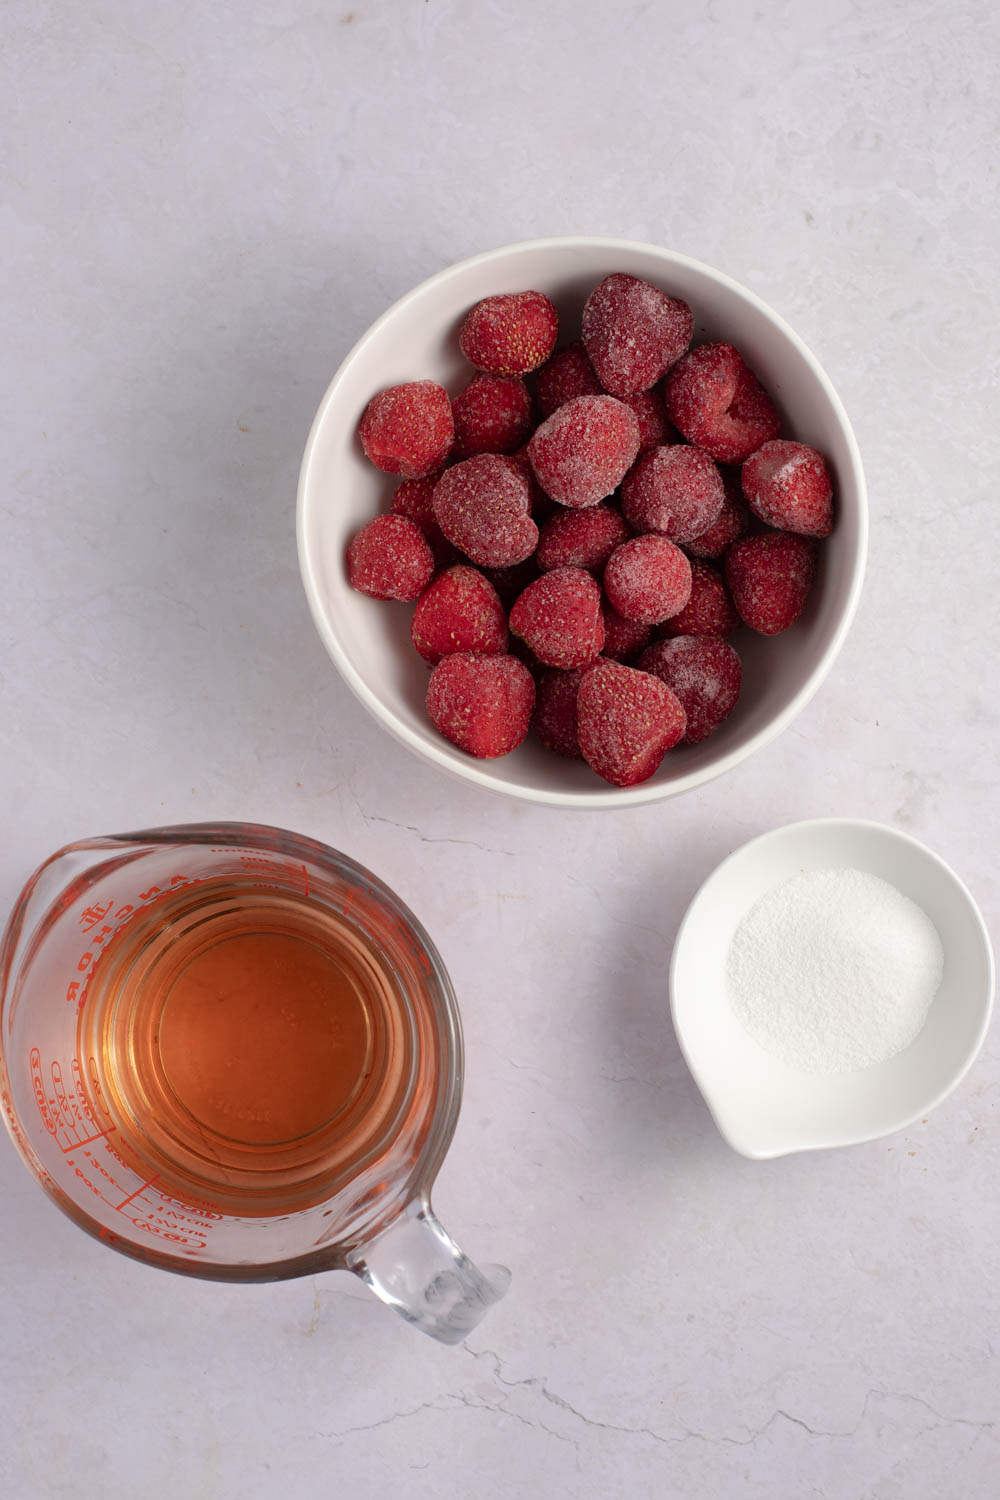 Fragrance ingredients - rose wine, frozen strawberries, sugar and ice